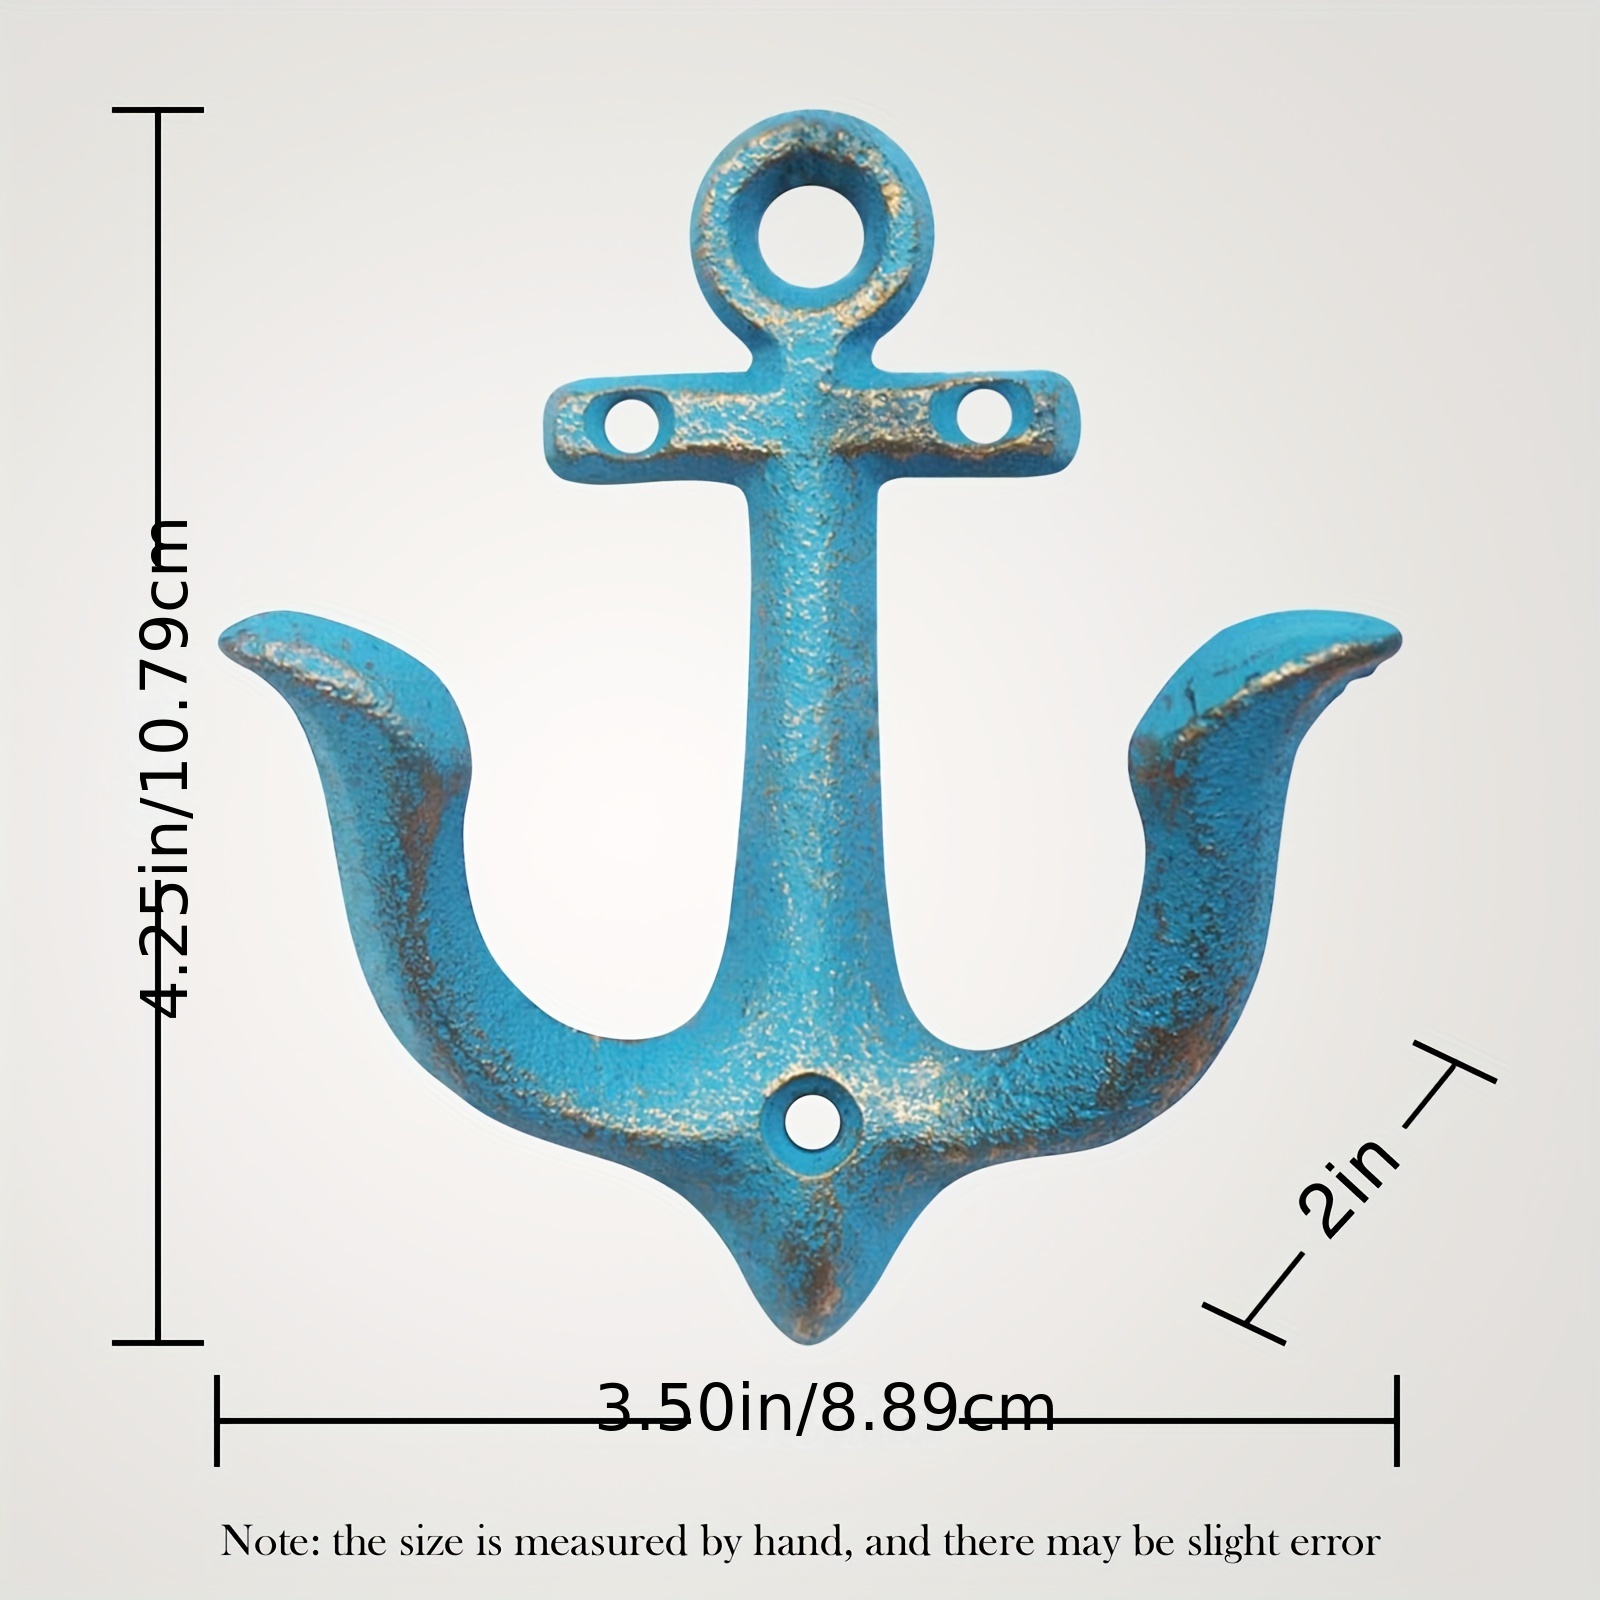 1pc, Vintage Rustic Cast Iron Nautical Anchor Design Wall Hooks Coat Hooks  Rack, Decorative Wall Mounted Antique Shabby Chic Metal Home Bathroom Towel